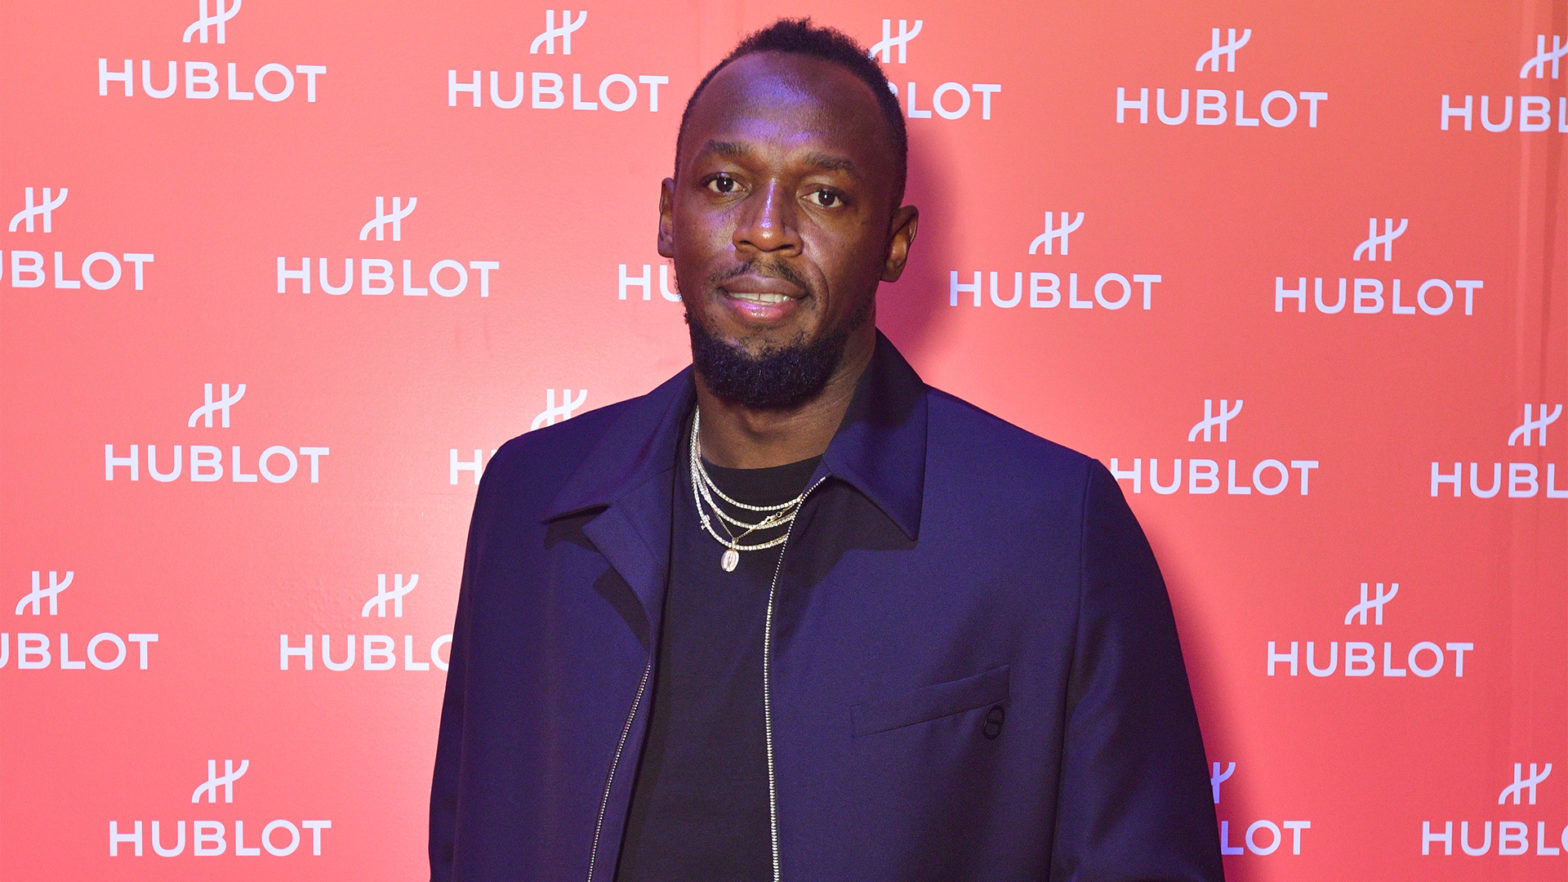 Usain Bolt Files To Trademark His Iconic Victory Pose Again As A Reported Effort To 'Protect His Image And Likeness' In The U.S.